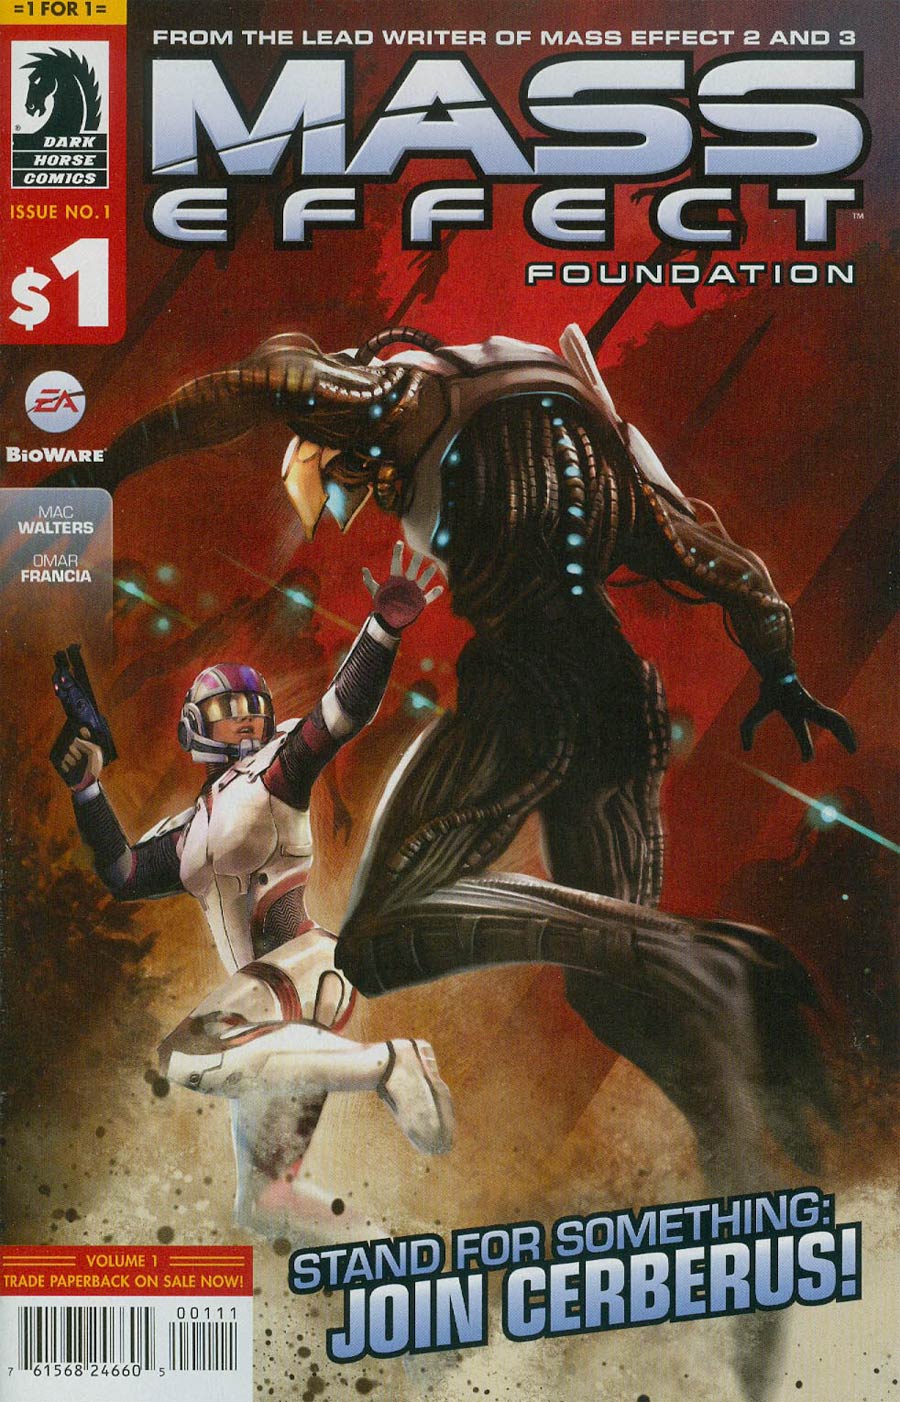 1 For $1 Mass Effect Foundation #1